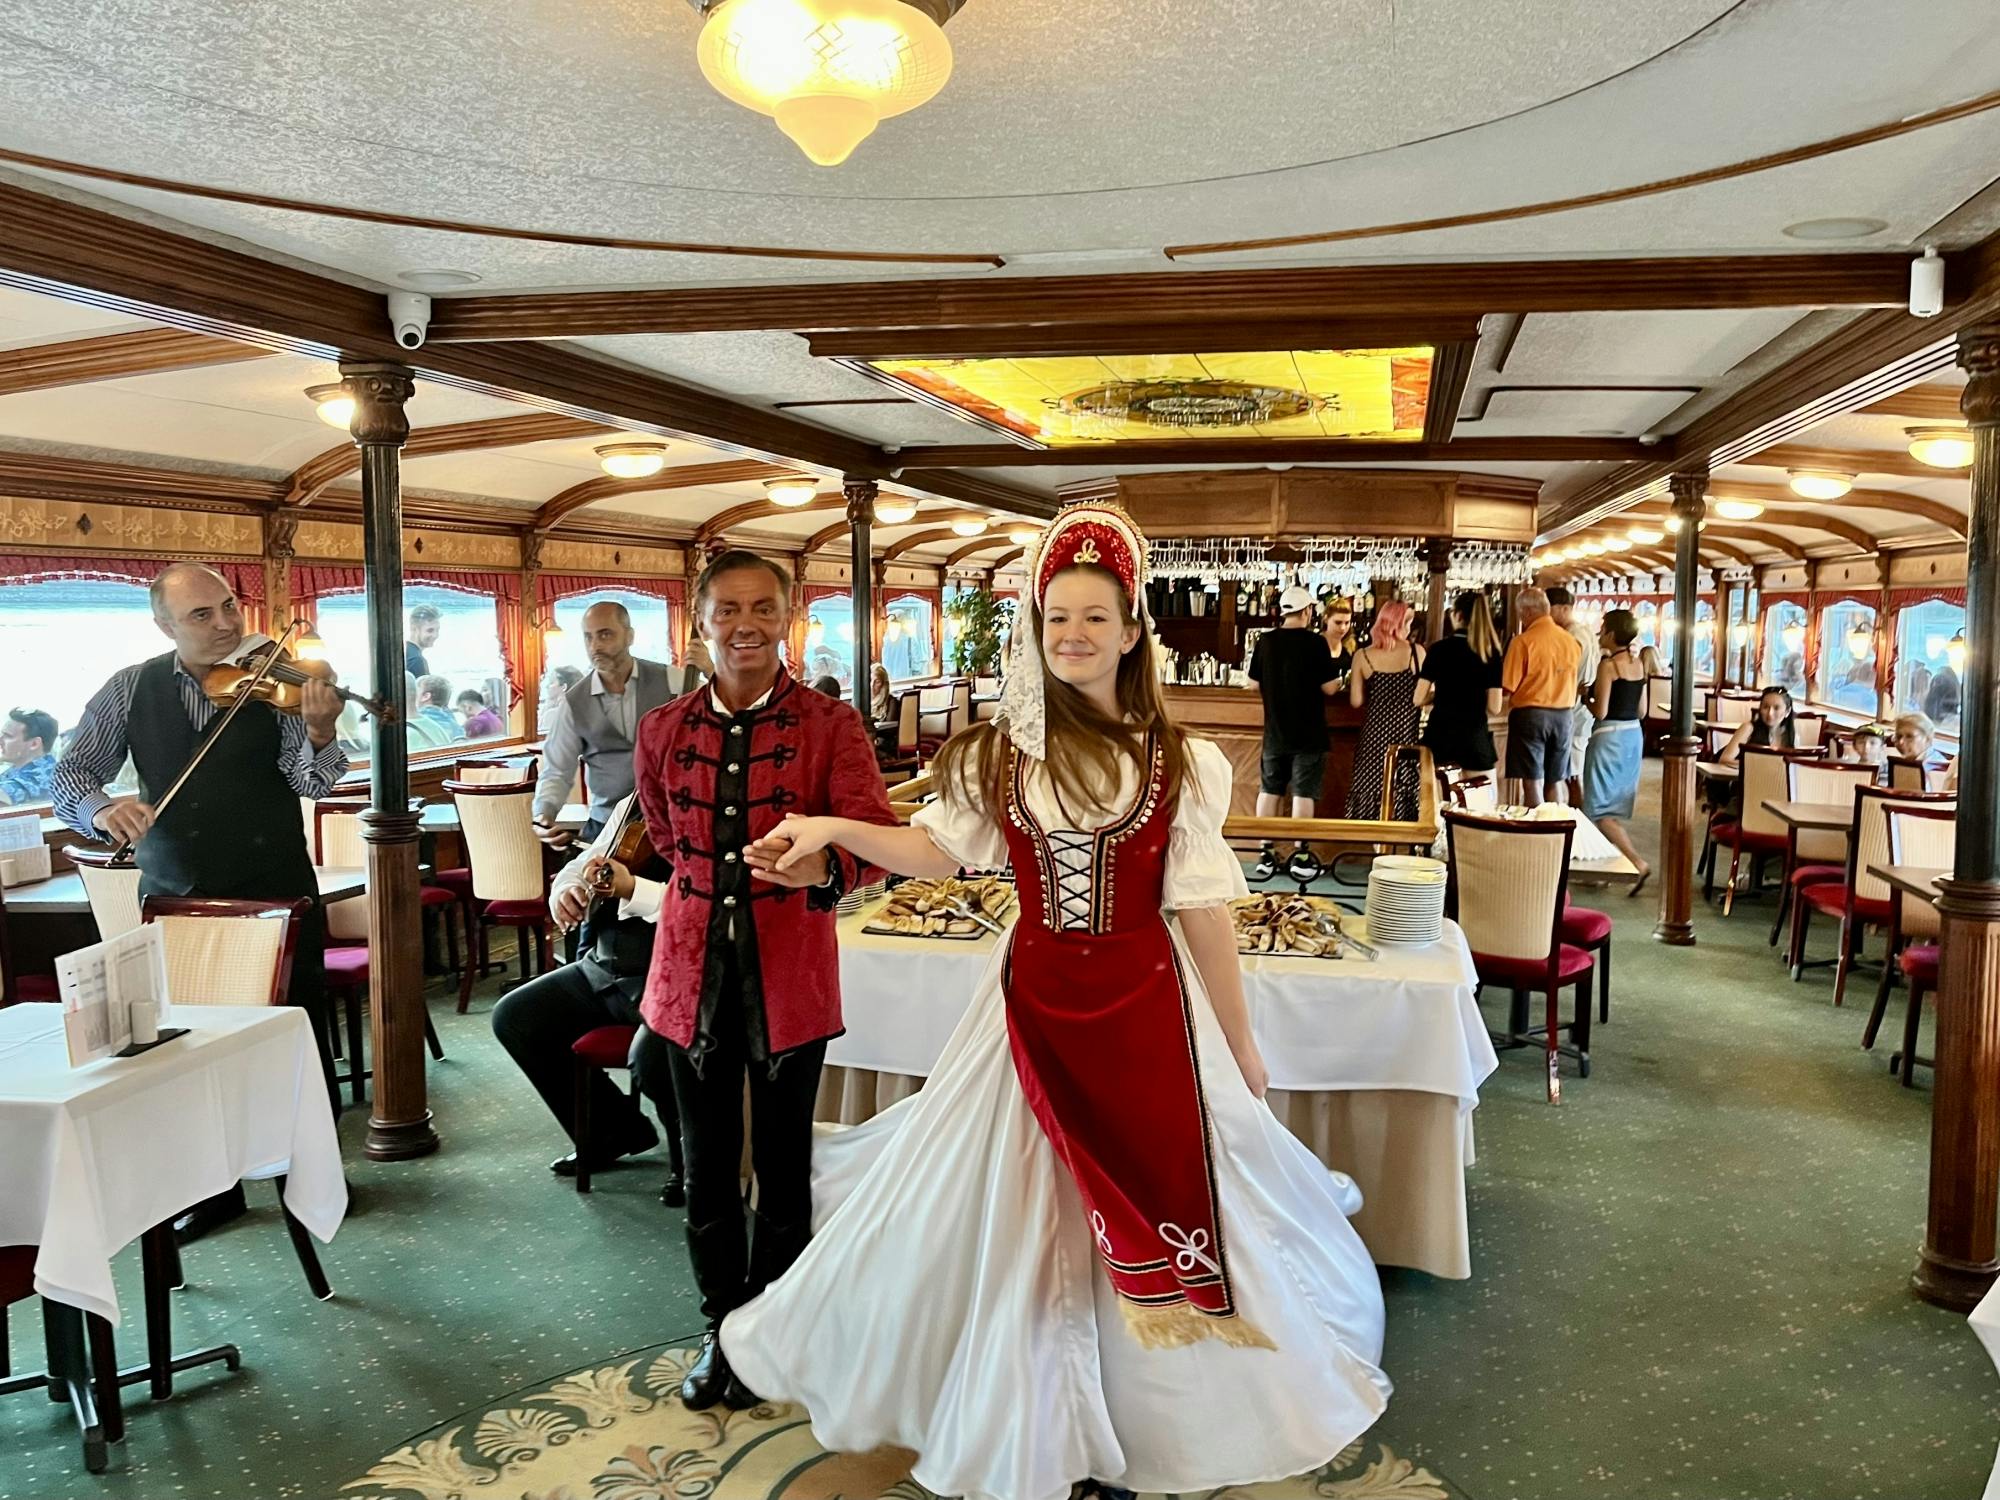 Dinner & cruise on the Danube with folklore dancing & live music